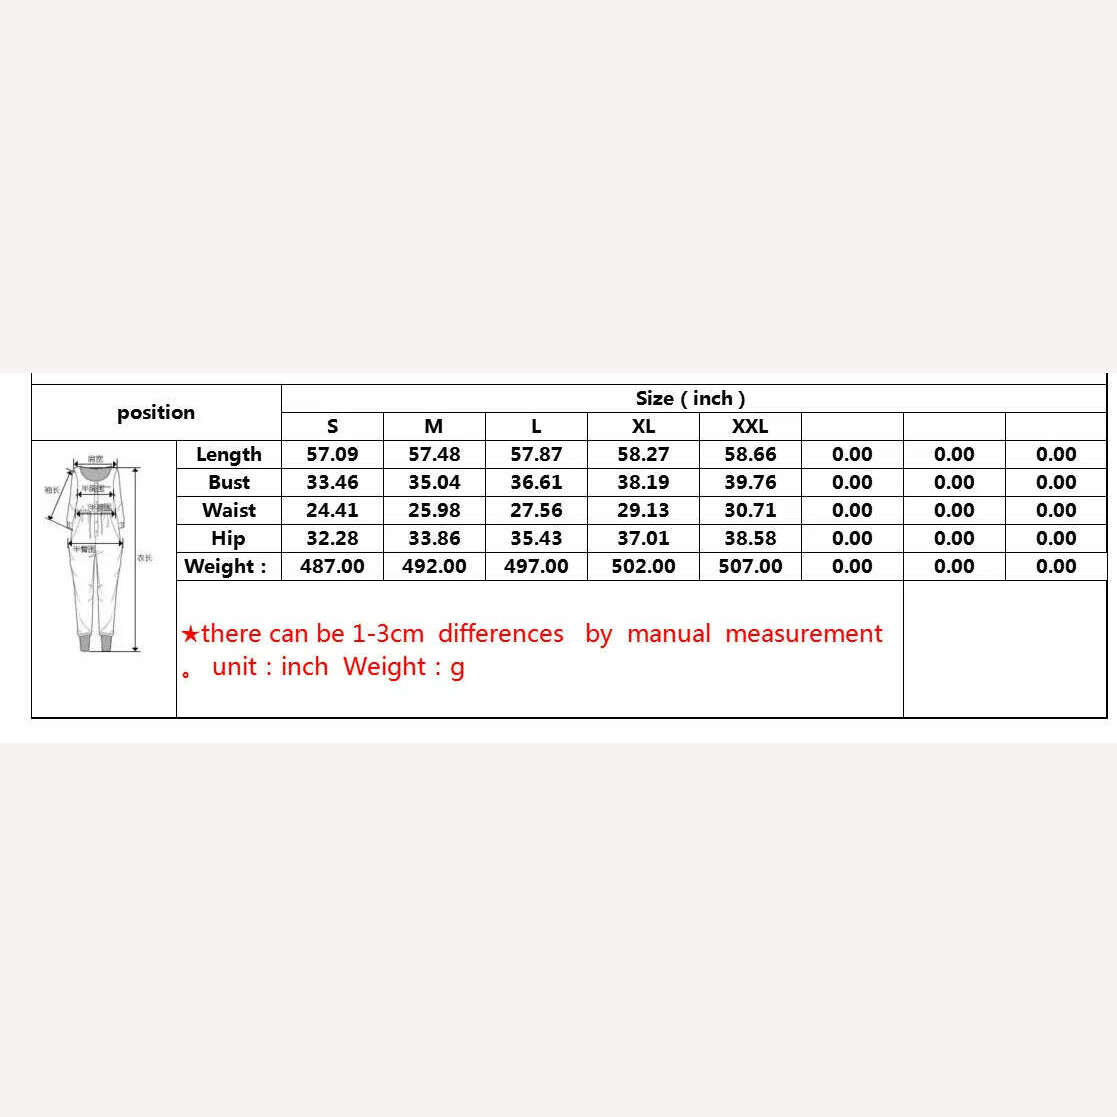 KIMLUD, Elegant Ribbon Bodycon Jumpsuits Sexy Long Sleeve Lace Up Romper Club Party Summer Women Clothes Overalls Luxury One Piece 2023, KIMLUD Womens Clothes